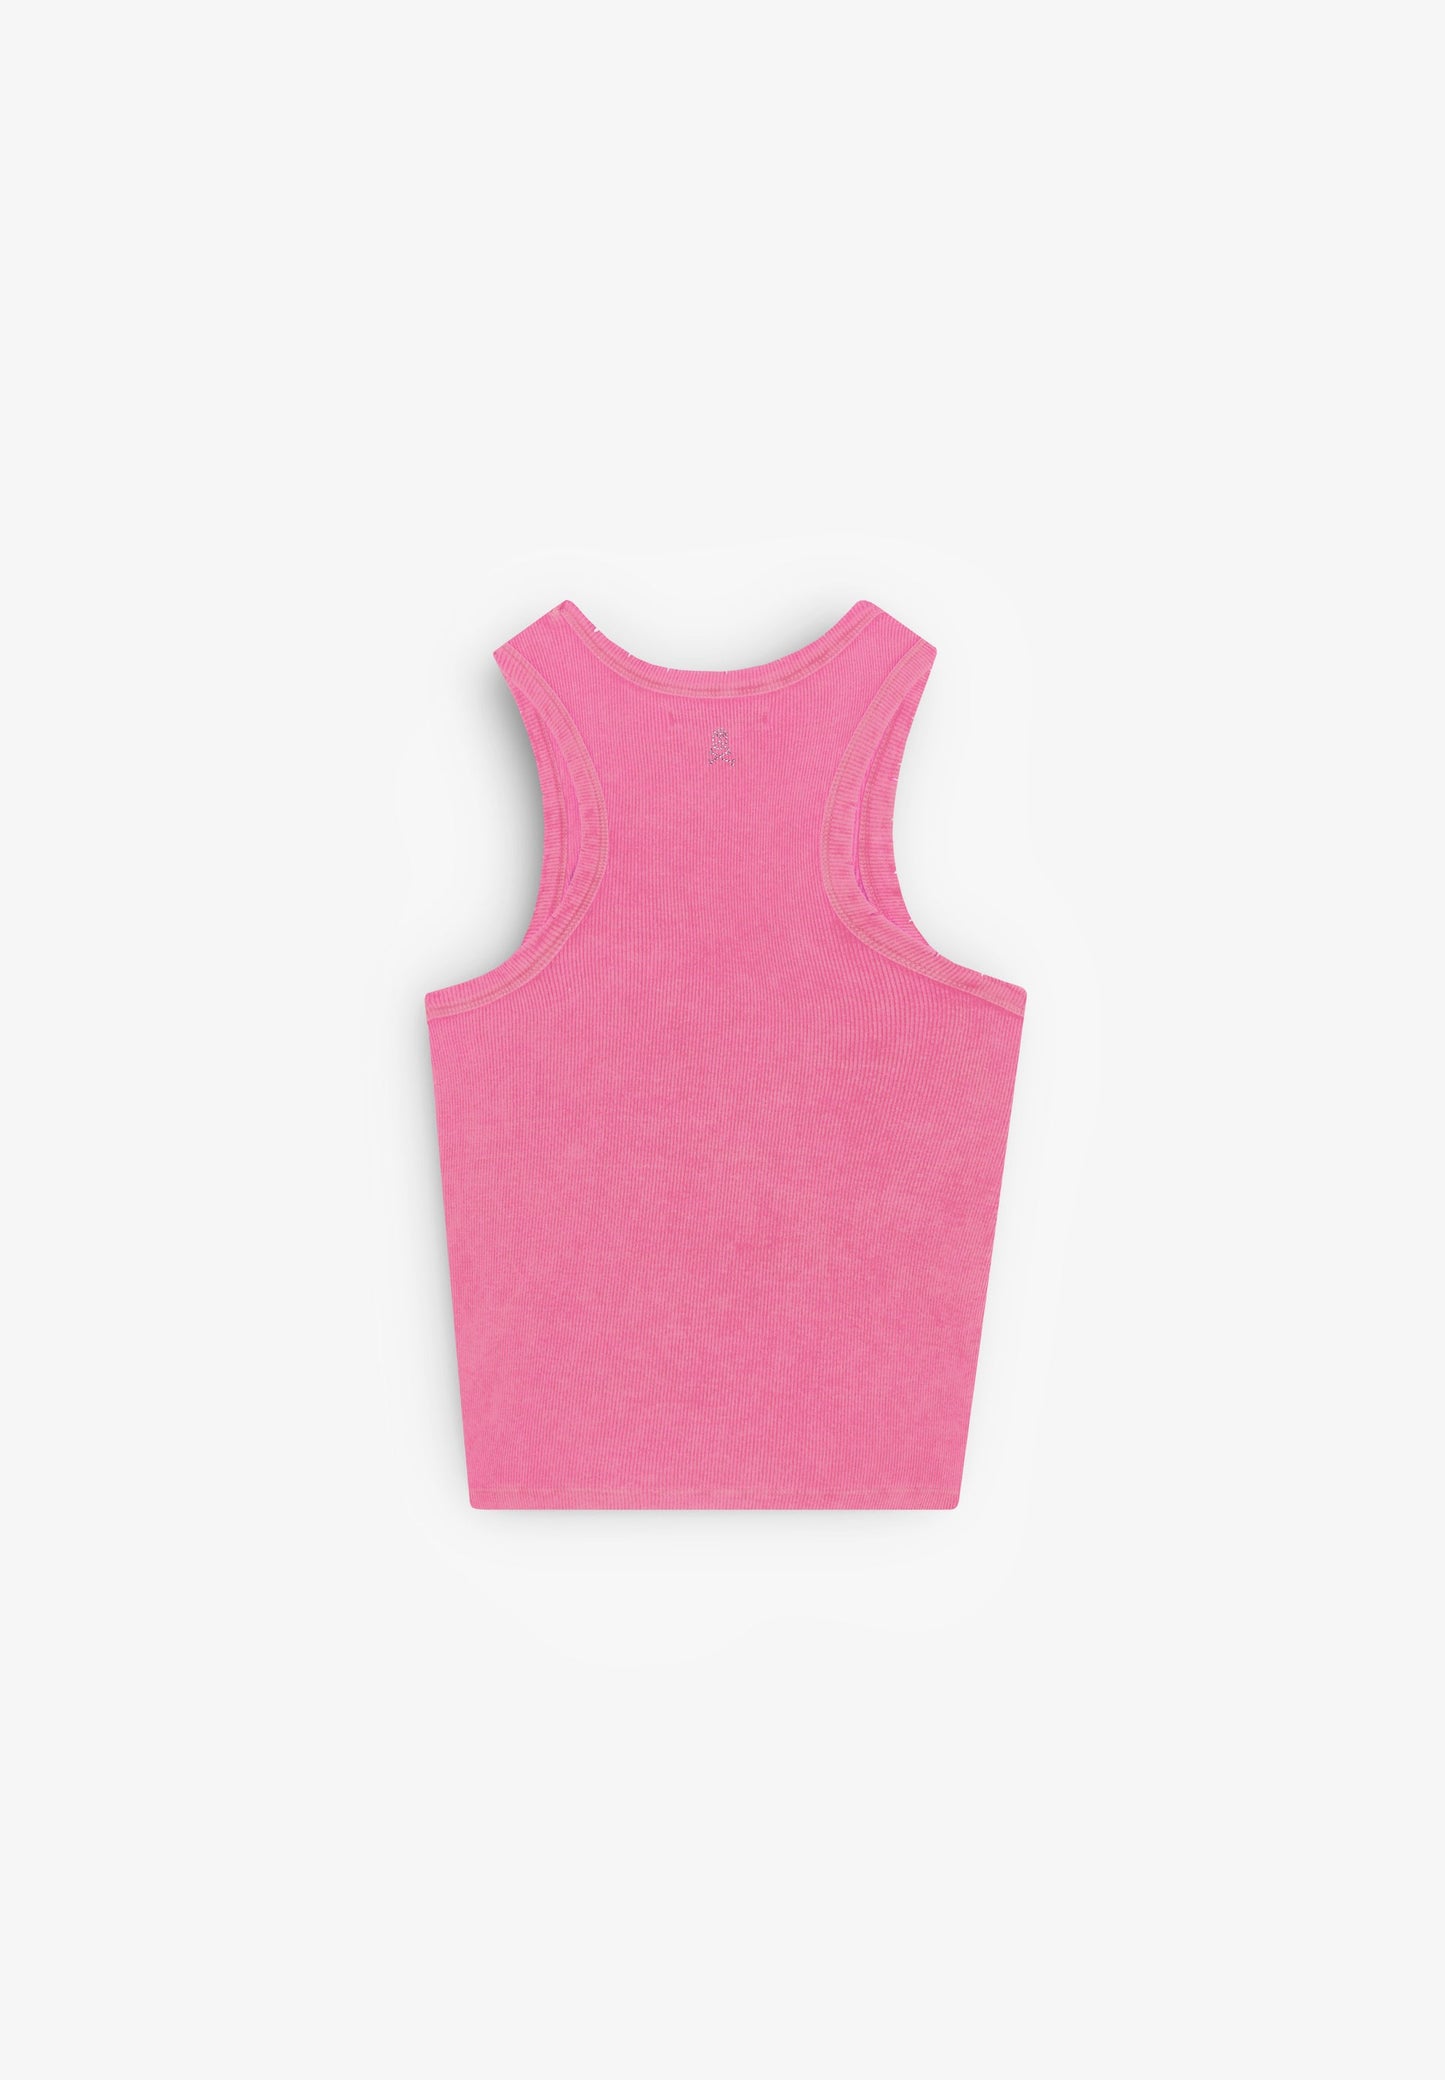 FADED EFFECT TANK TOP